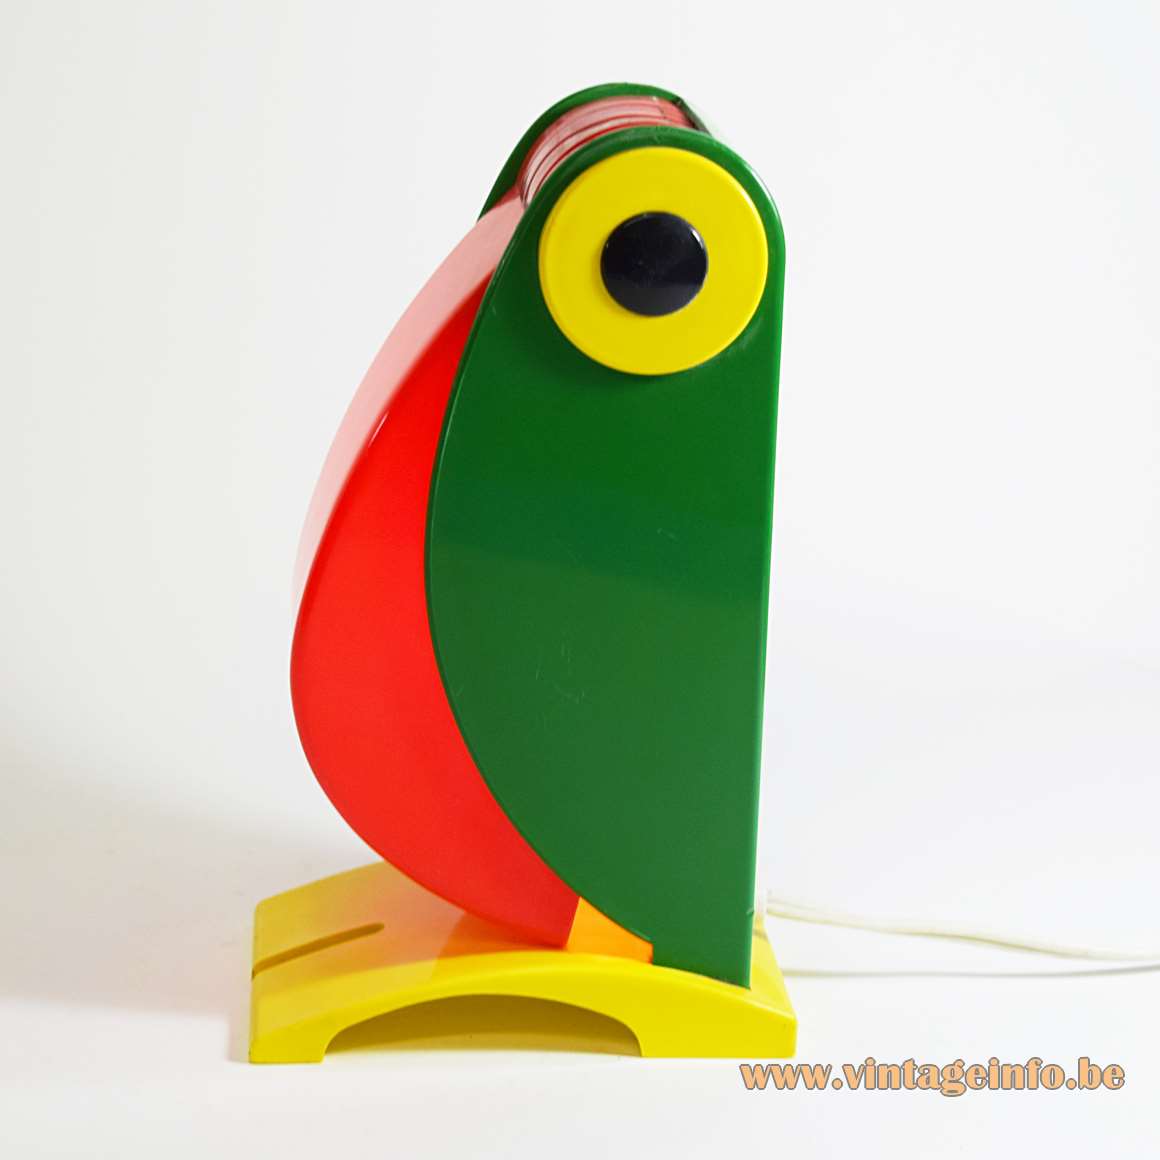 Old Timer Ferrari toucan table lamp green yellow & red plastic bird foldable lampshade 1960s 1970s Italy 